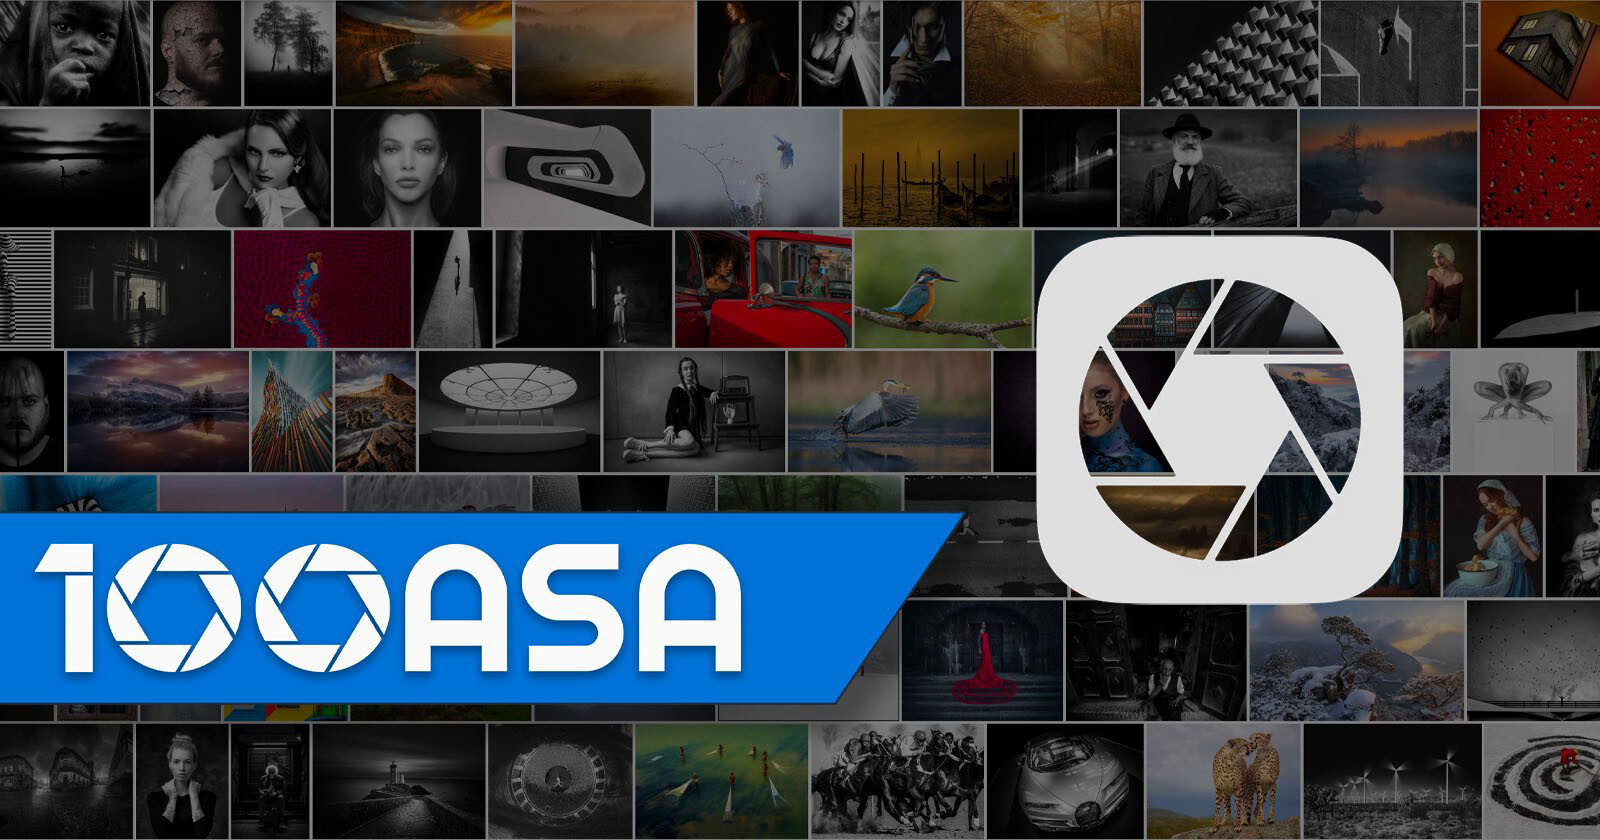  100asa launches long-awaited ios app challenges instagram 